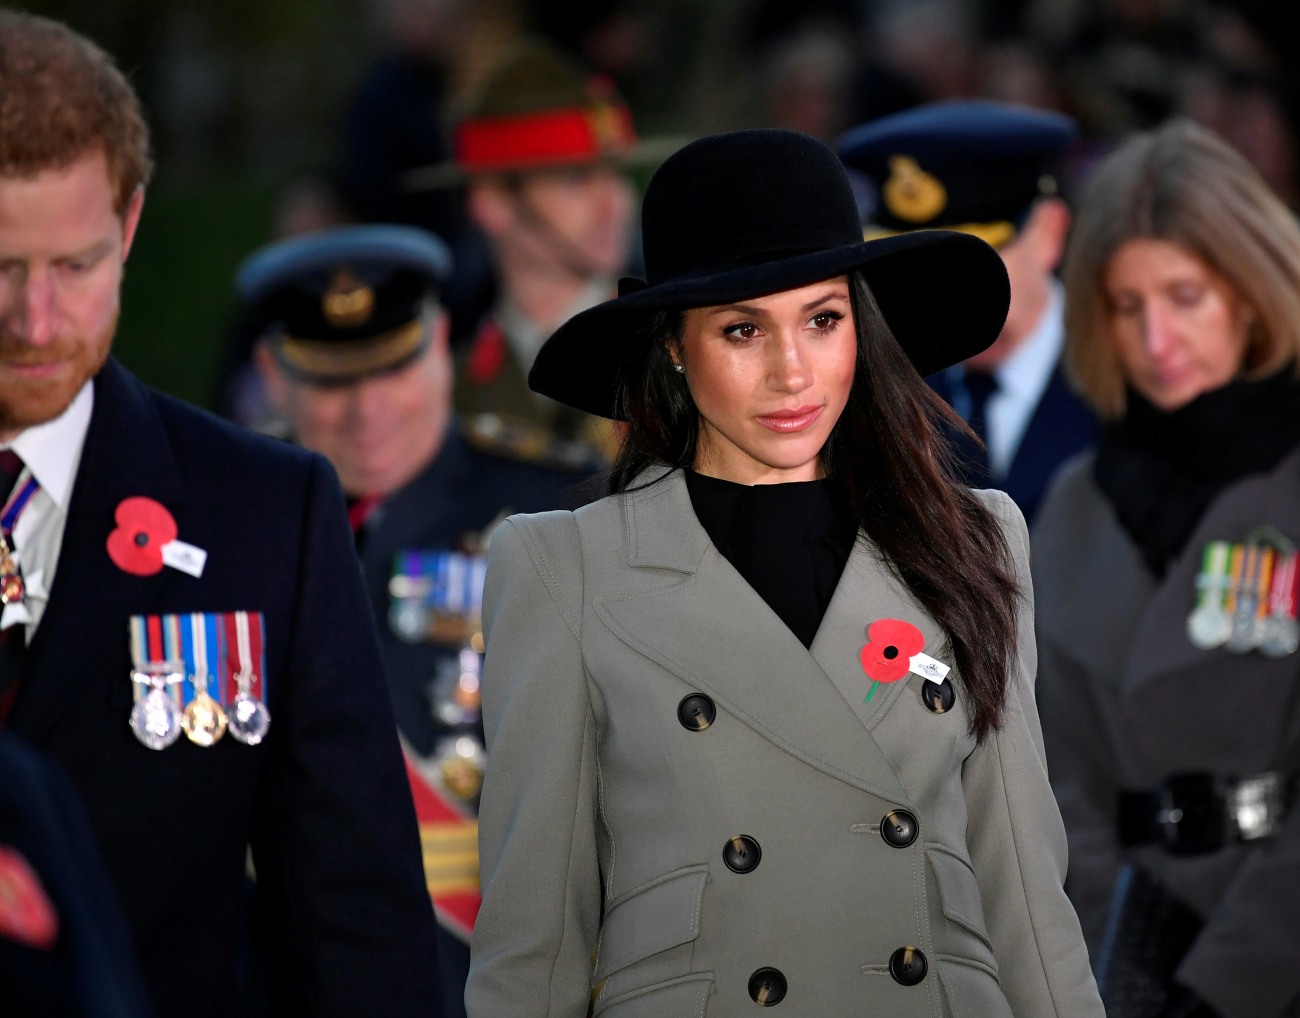 Britain's Prince Harry and his fiancee Meghan Markle commemorate Anzac Day in London